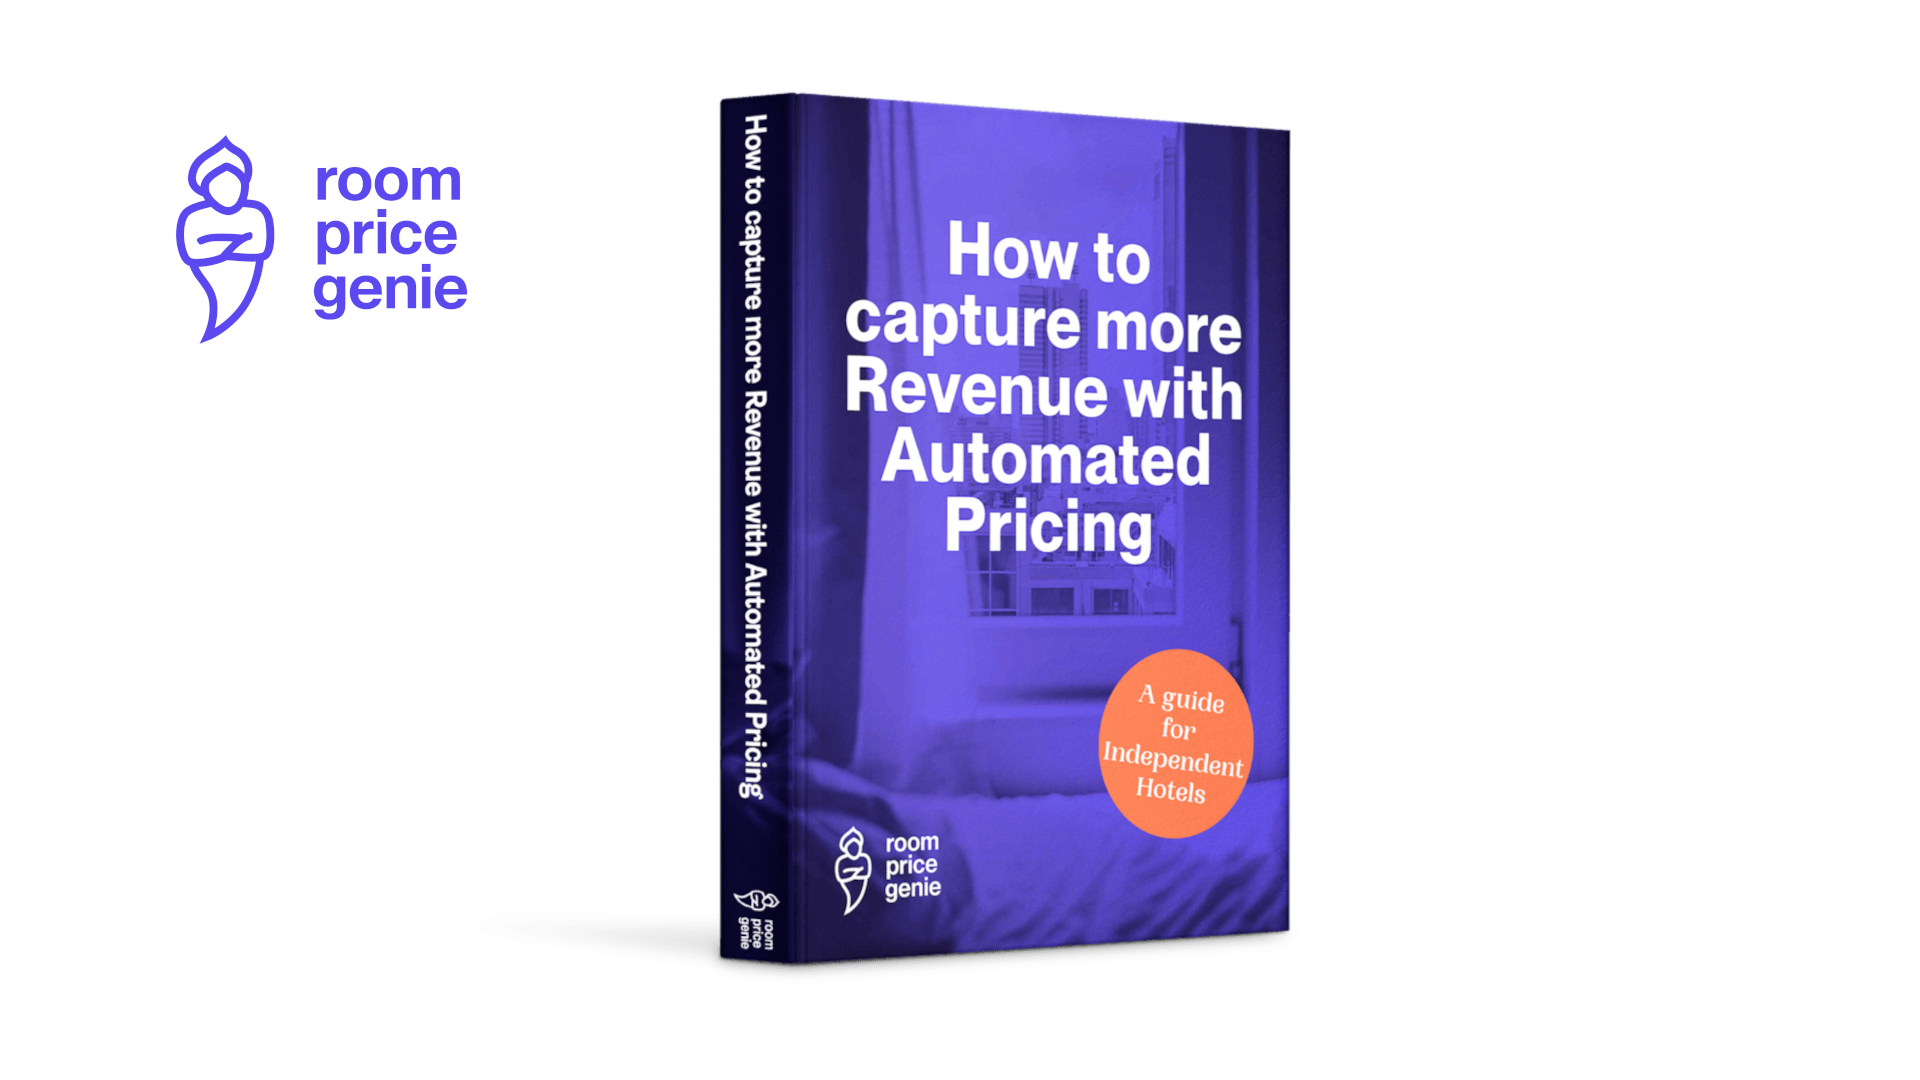 article image for roompricegenie guide on how to capture more revenue with automated pricing